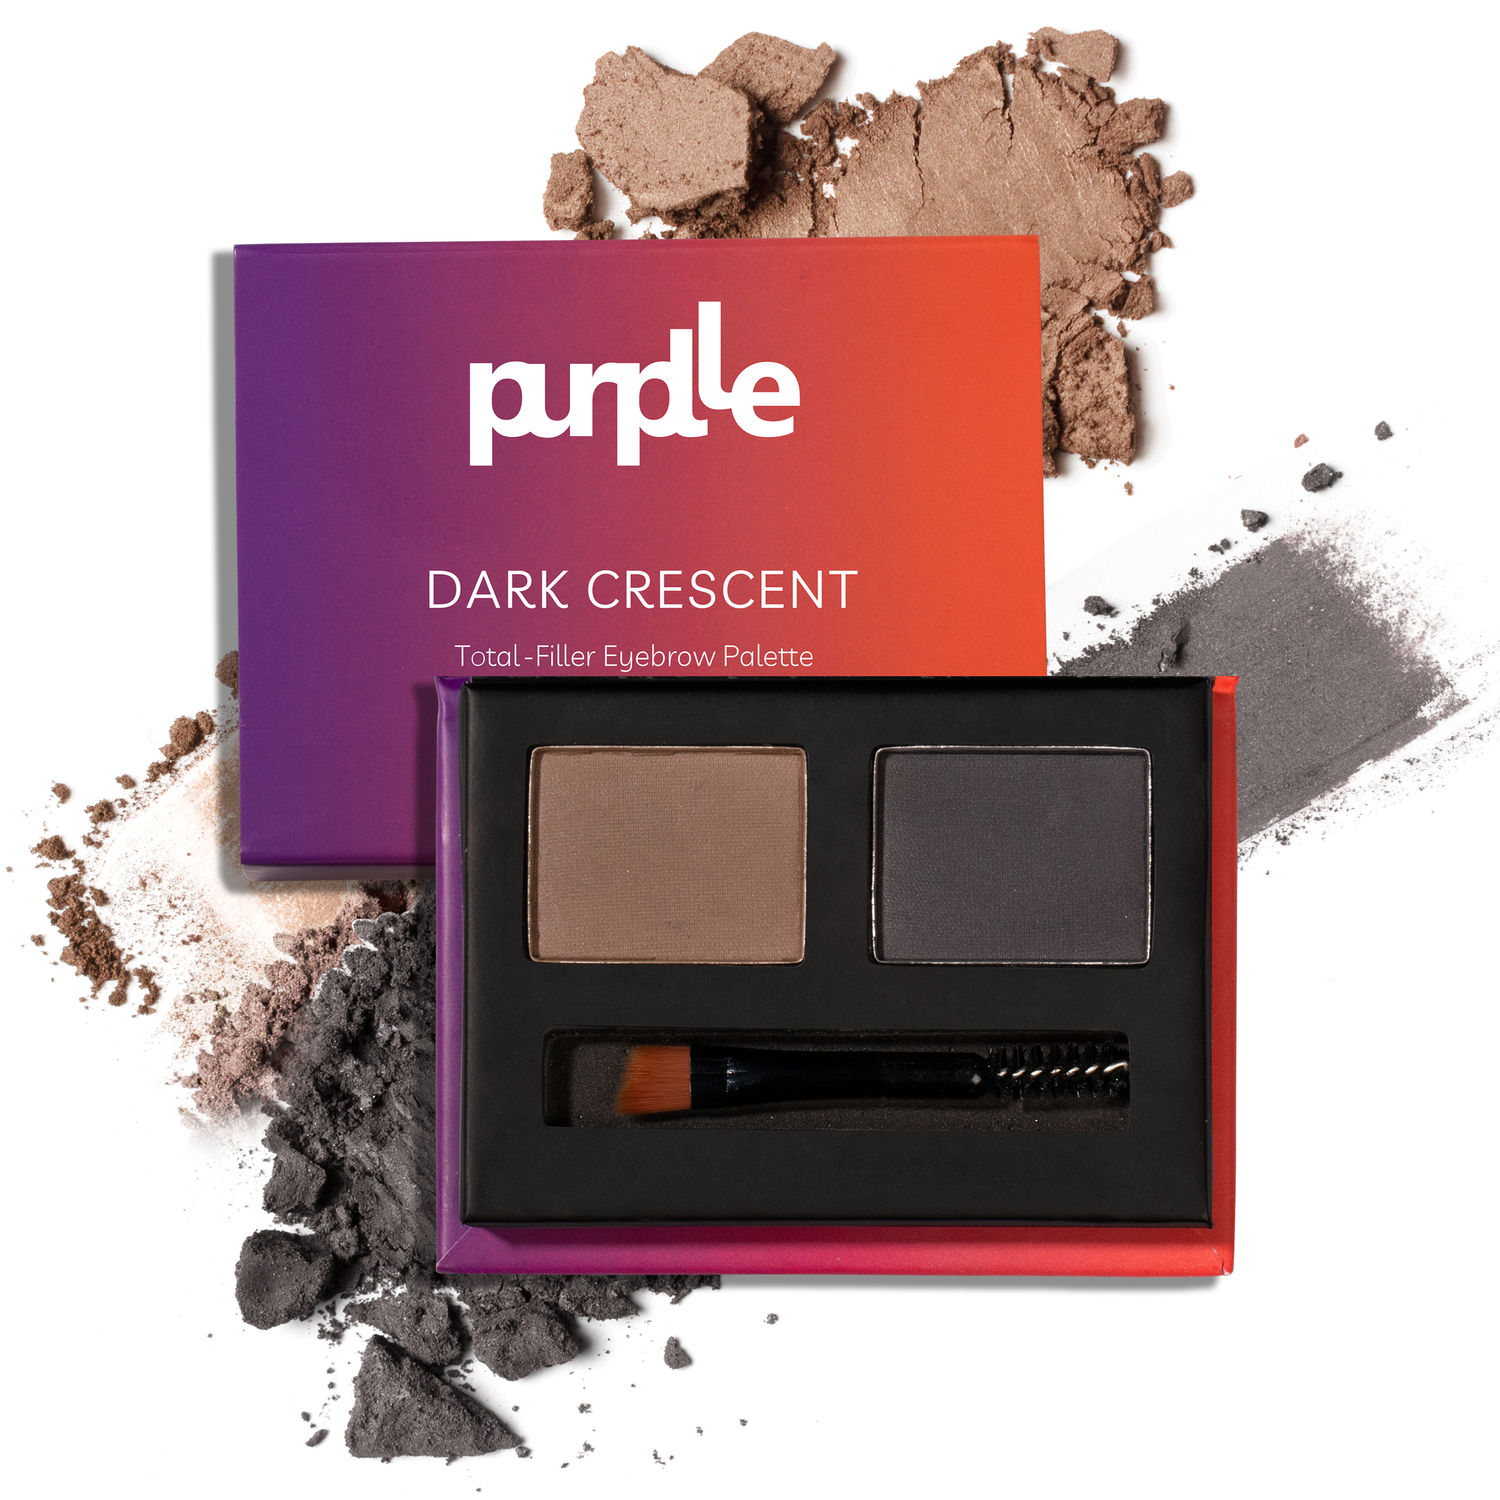 Purplle Eyebrow Palette, Dark Crescent Total Filler | For Fuller Brows | Brow Shaping | Eyebrow Enhancer| Natural Looking | Long Lasting (4 gm)